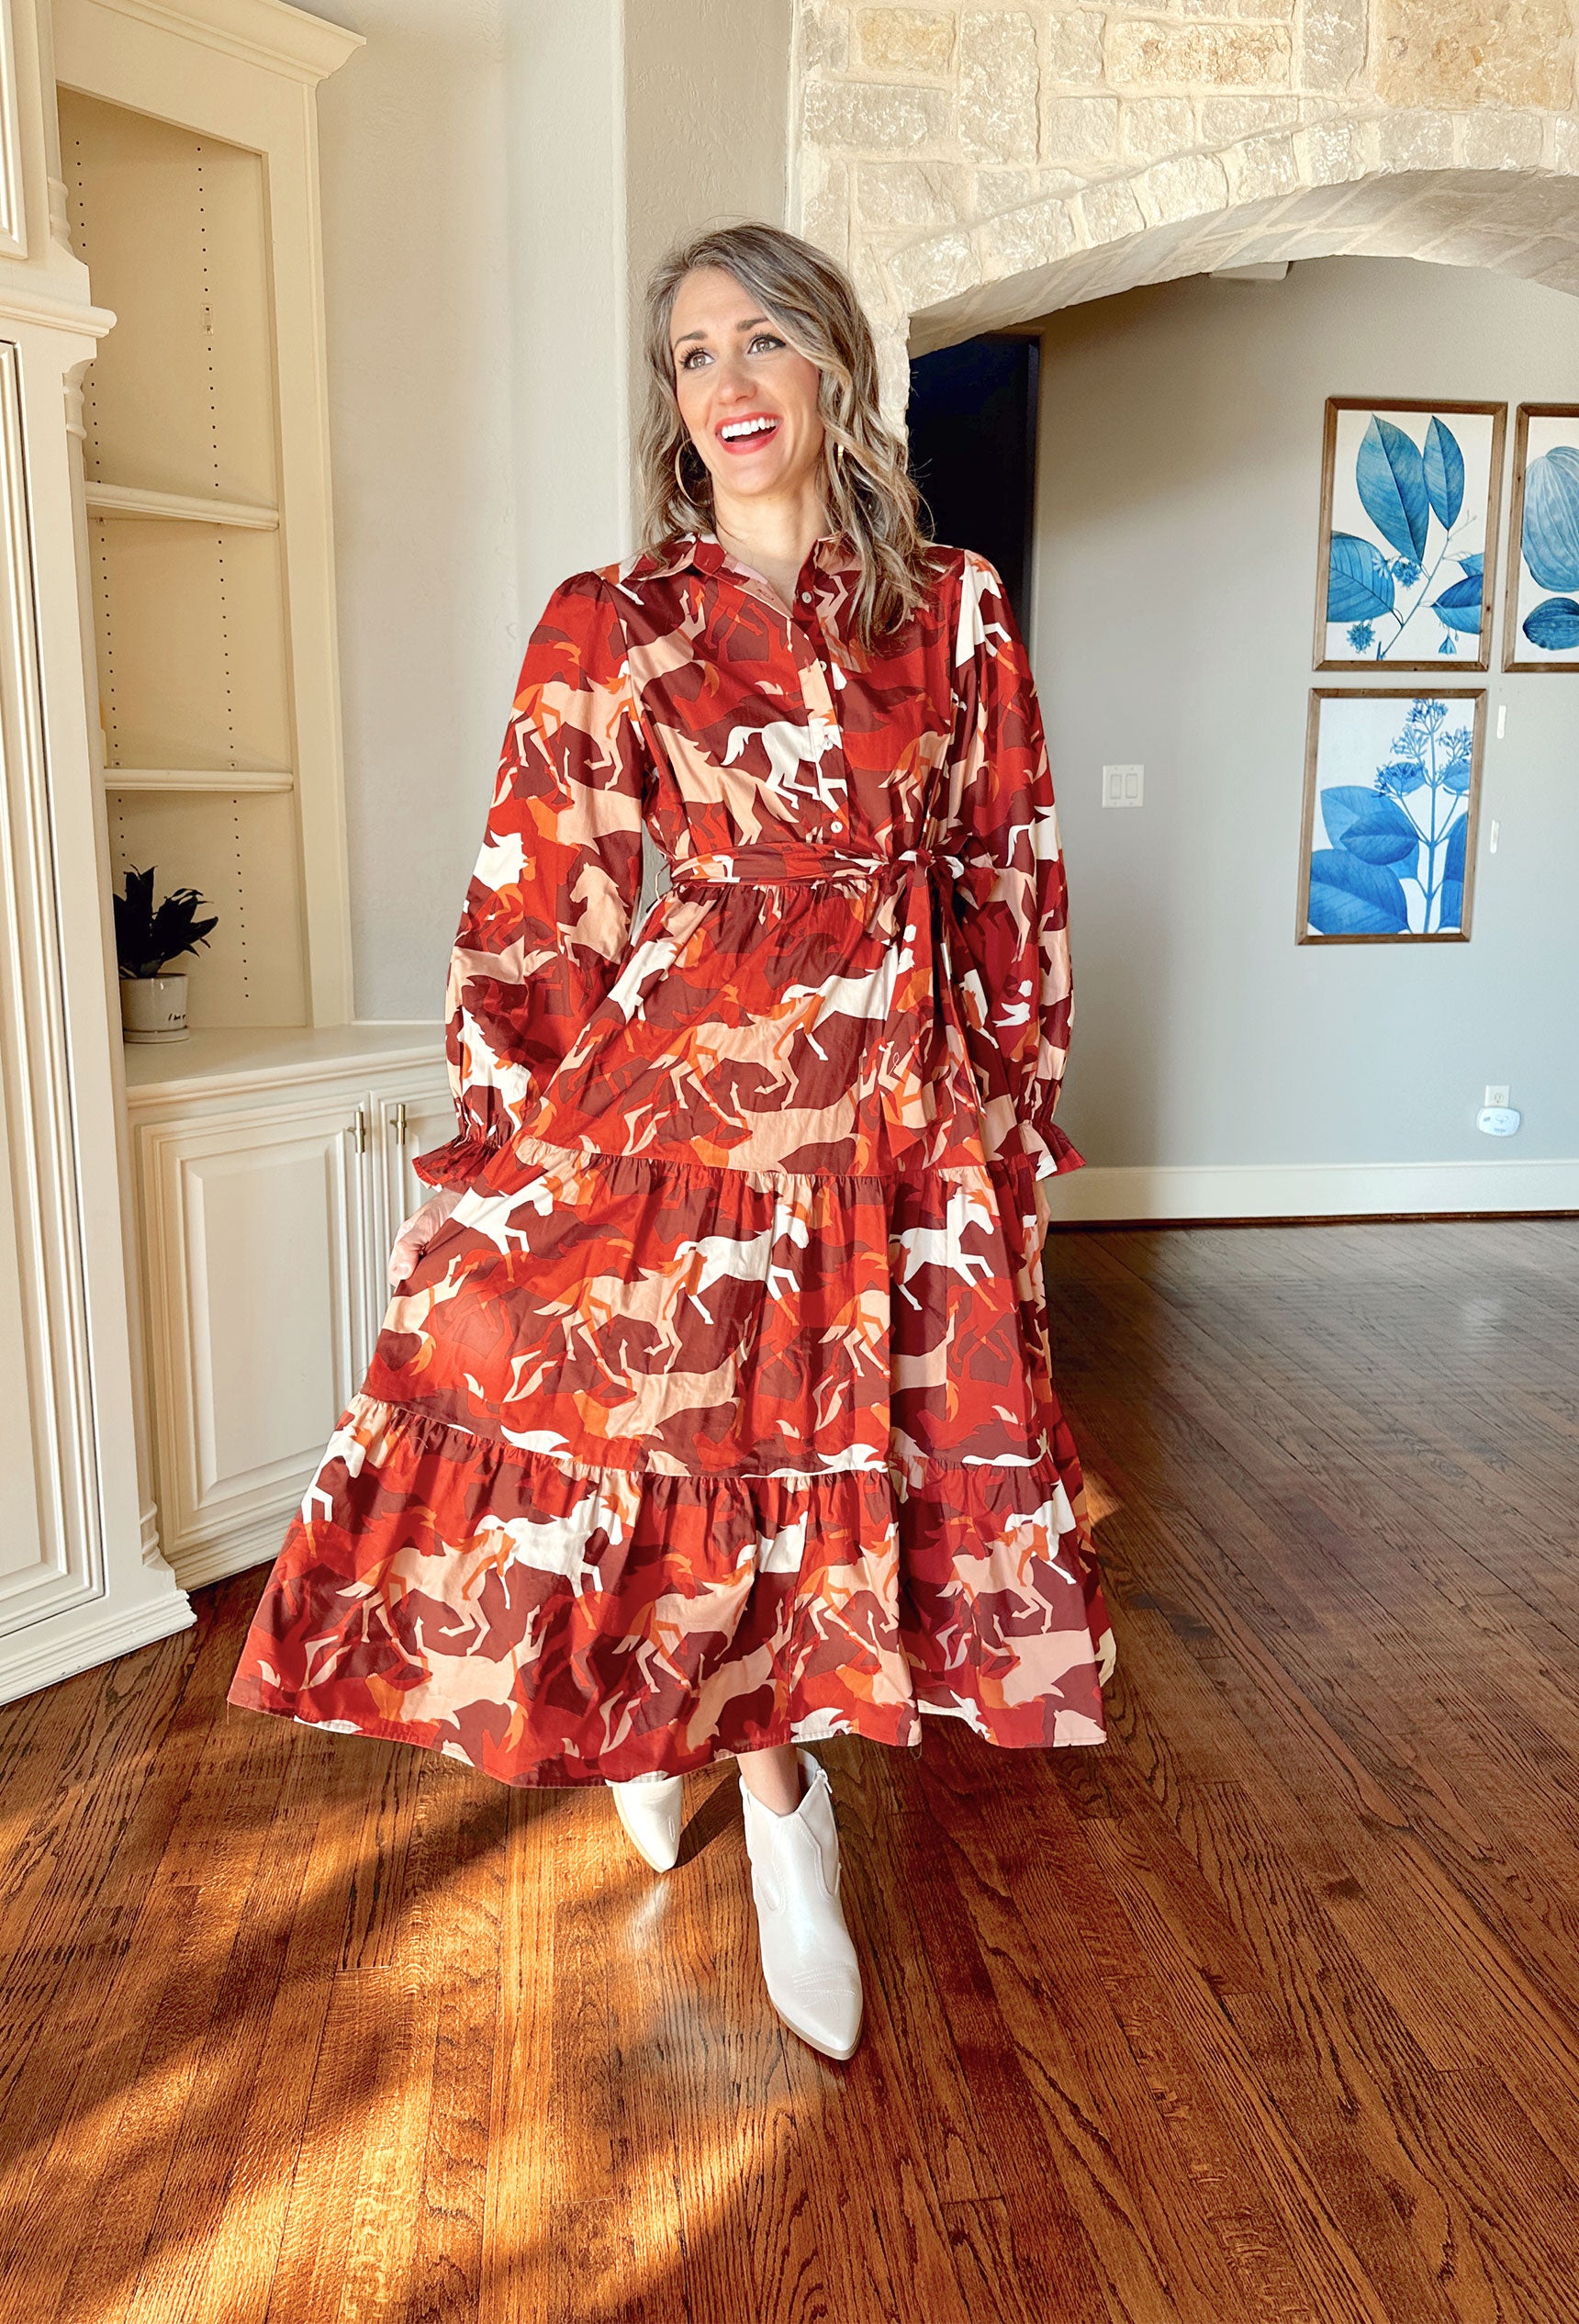 Not My First Rodeo Midi Dress, burnt orange, burgundy, red, cream, and pale orange long sleeve midi dress with horses printed on it, quarter length button up and tie waist 